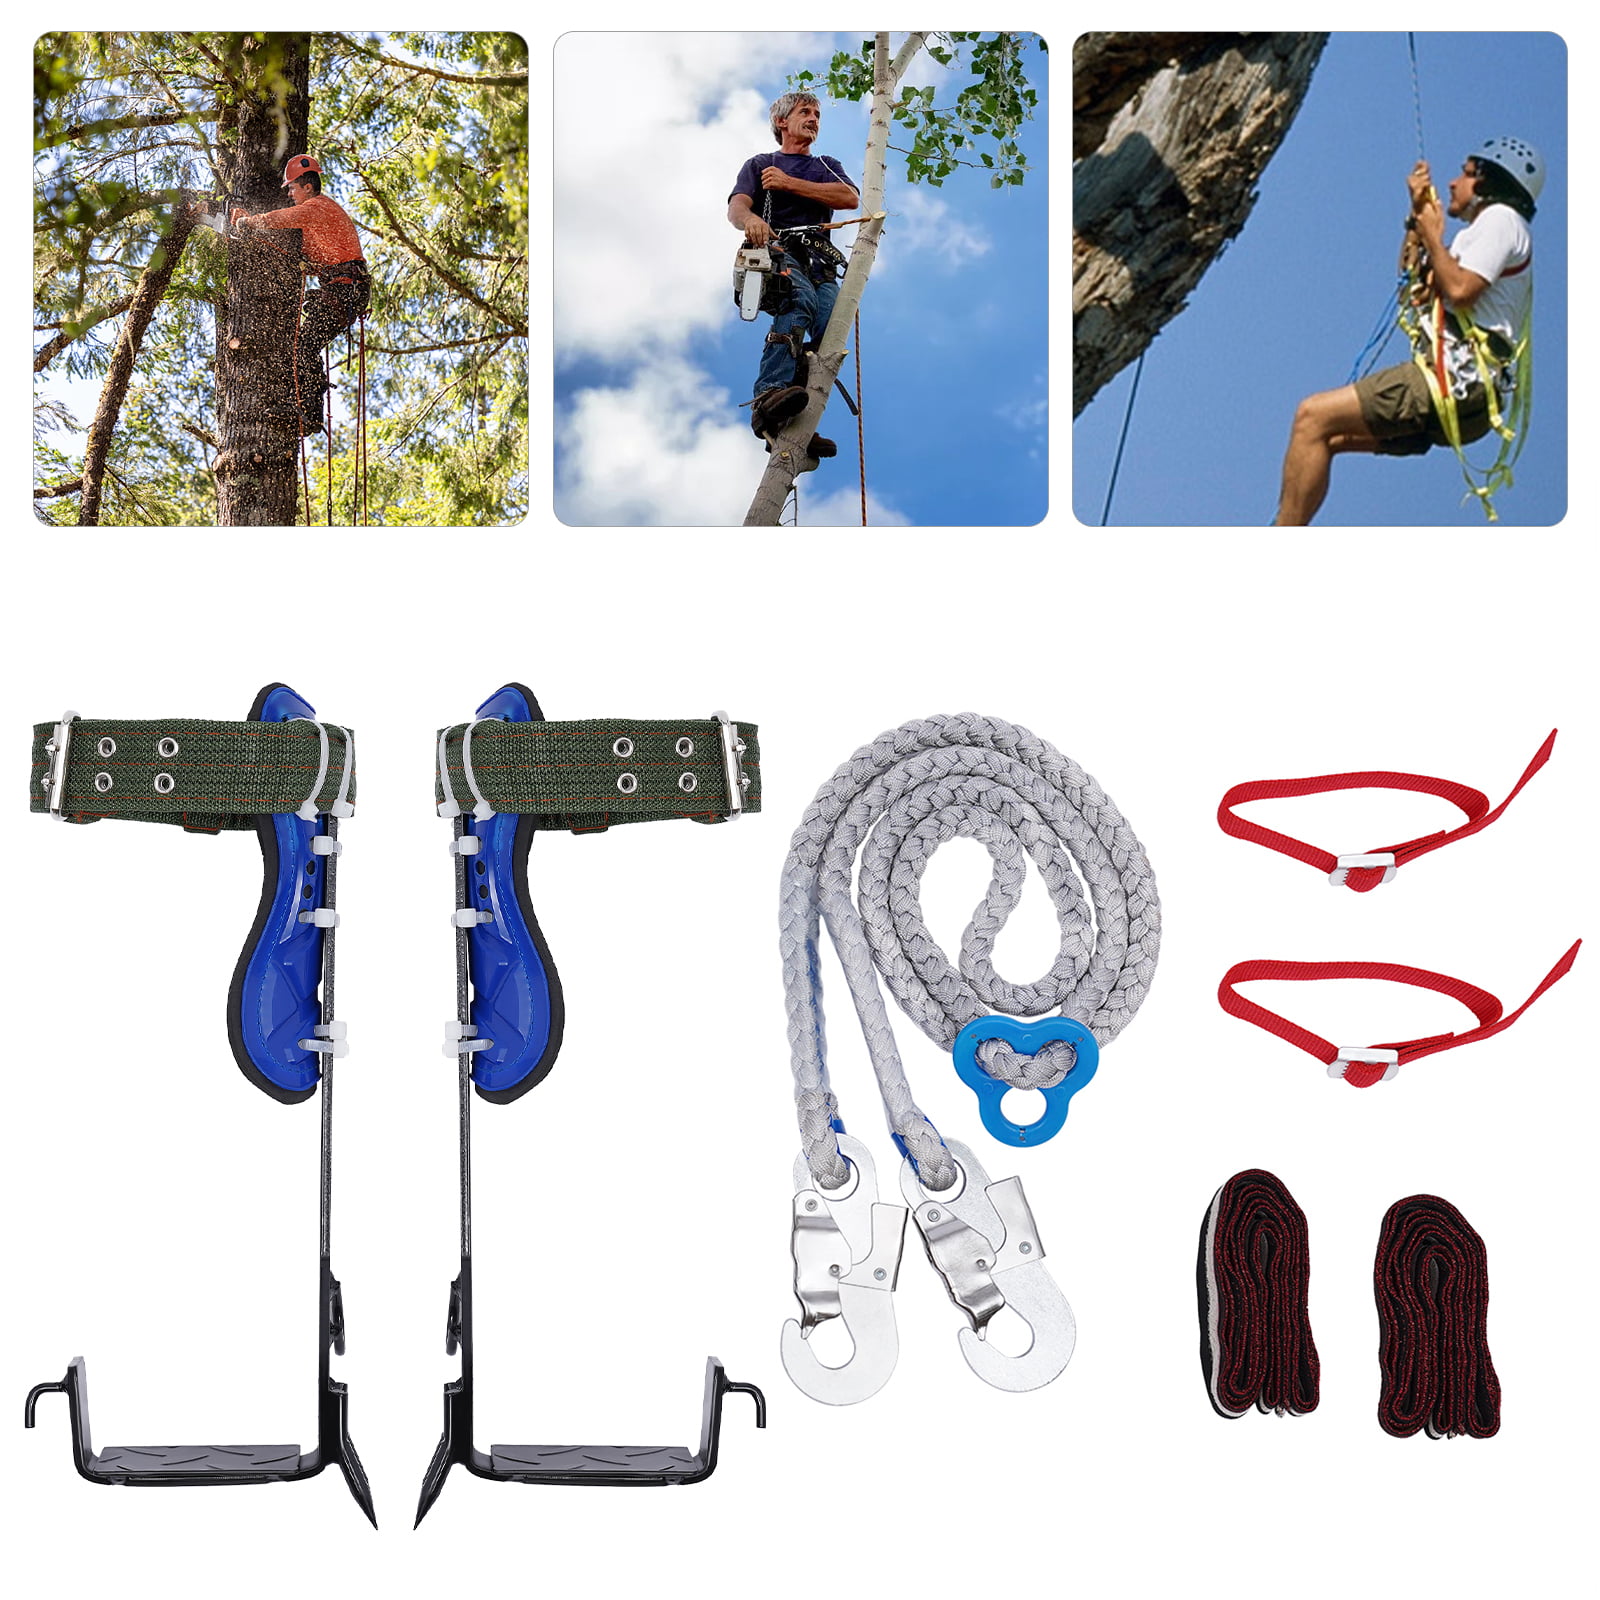 Miumaeov Tree Climbing Gear, with Adjustable Climbing Belt and Rope, Tree  Climbing Spikes for Climbing Trees, Outdoor Jungle Survival, Picking Fruit,  Sports 